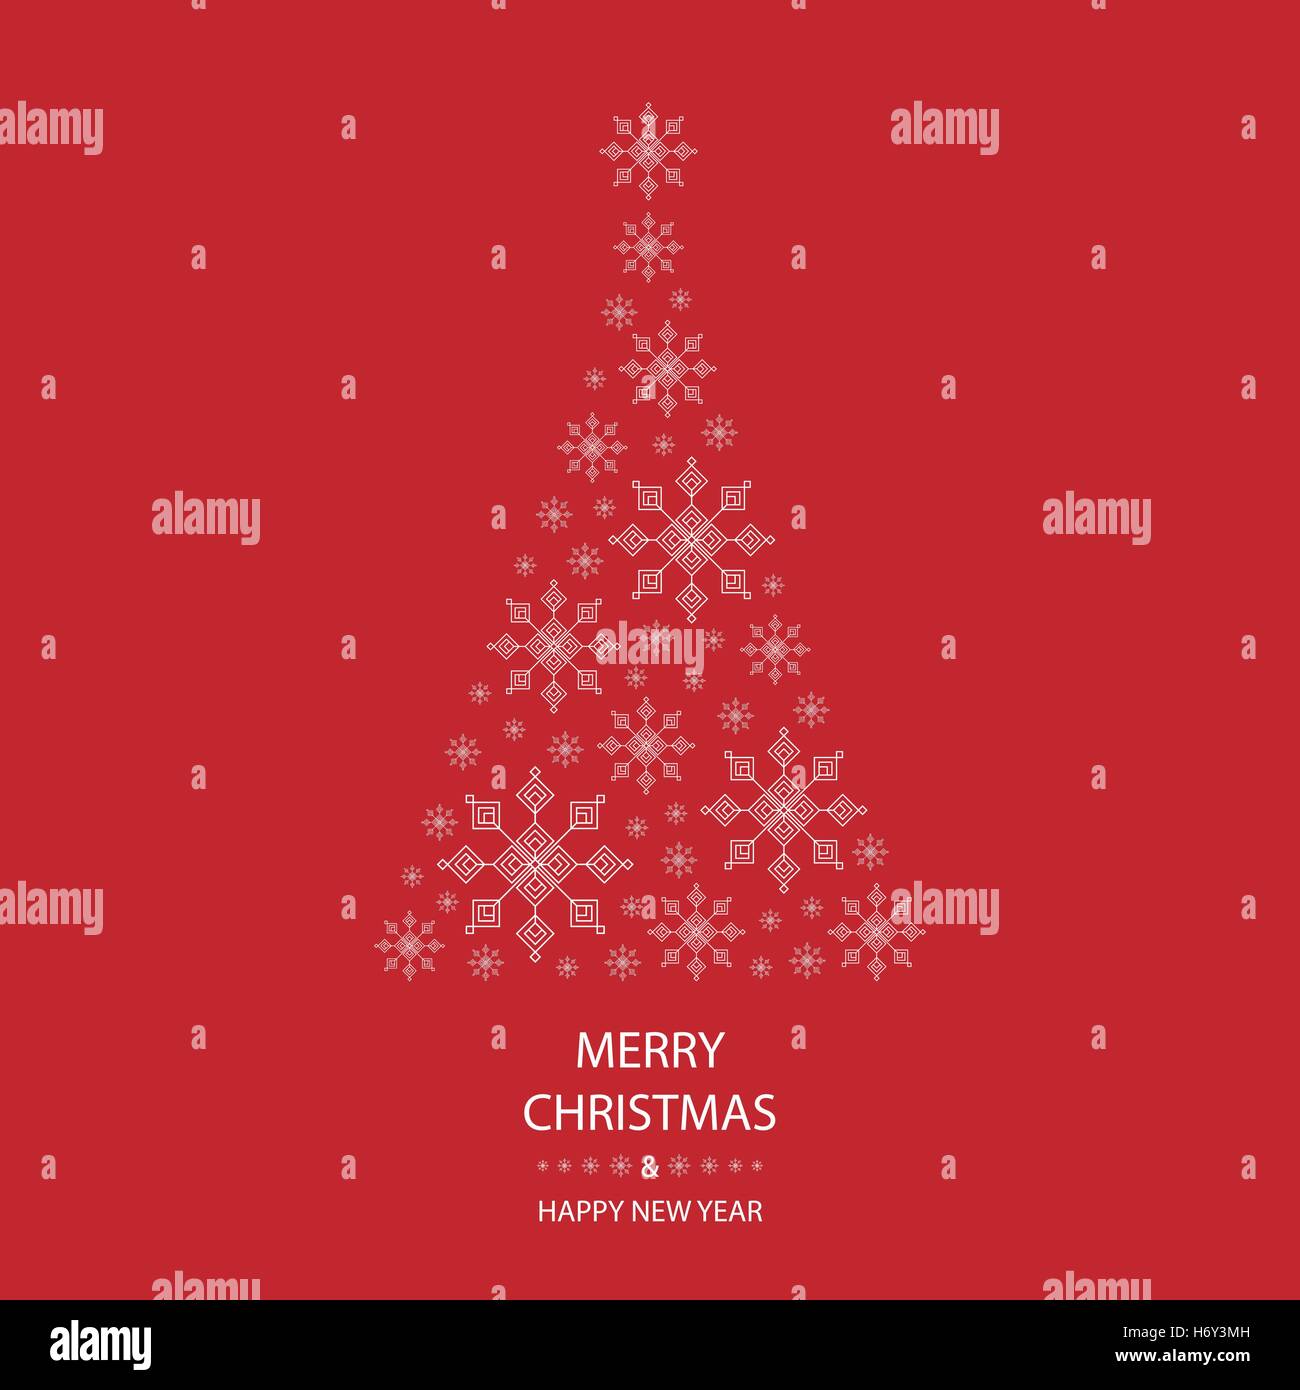 Christmas tree shaped from white snowflakes on red background with white text graphics Merry Christmas and Happy New Year Stock Vector